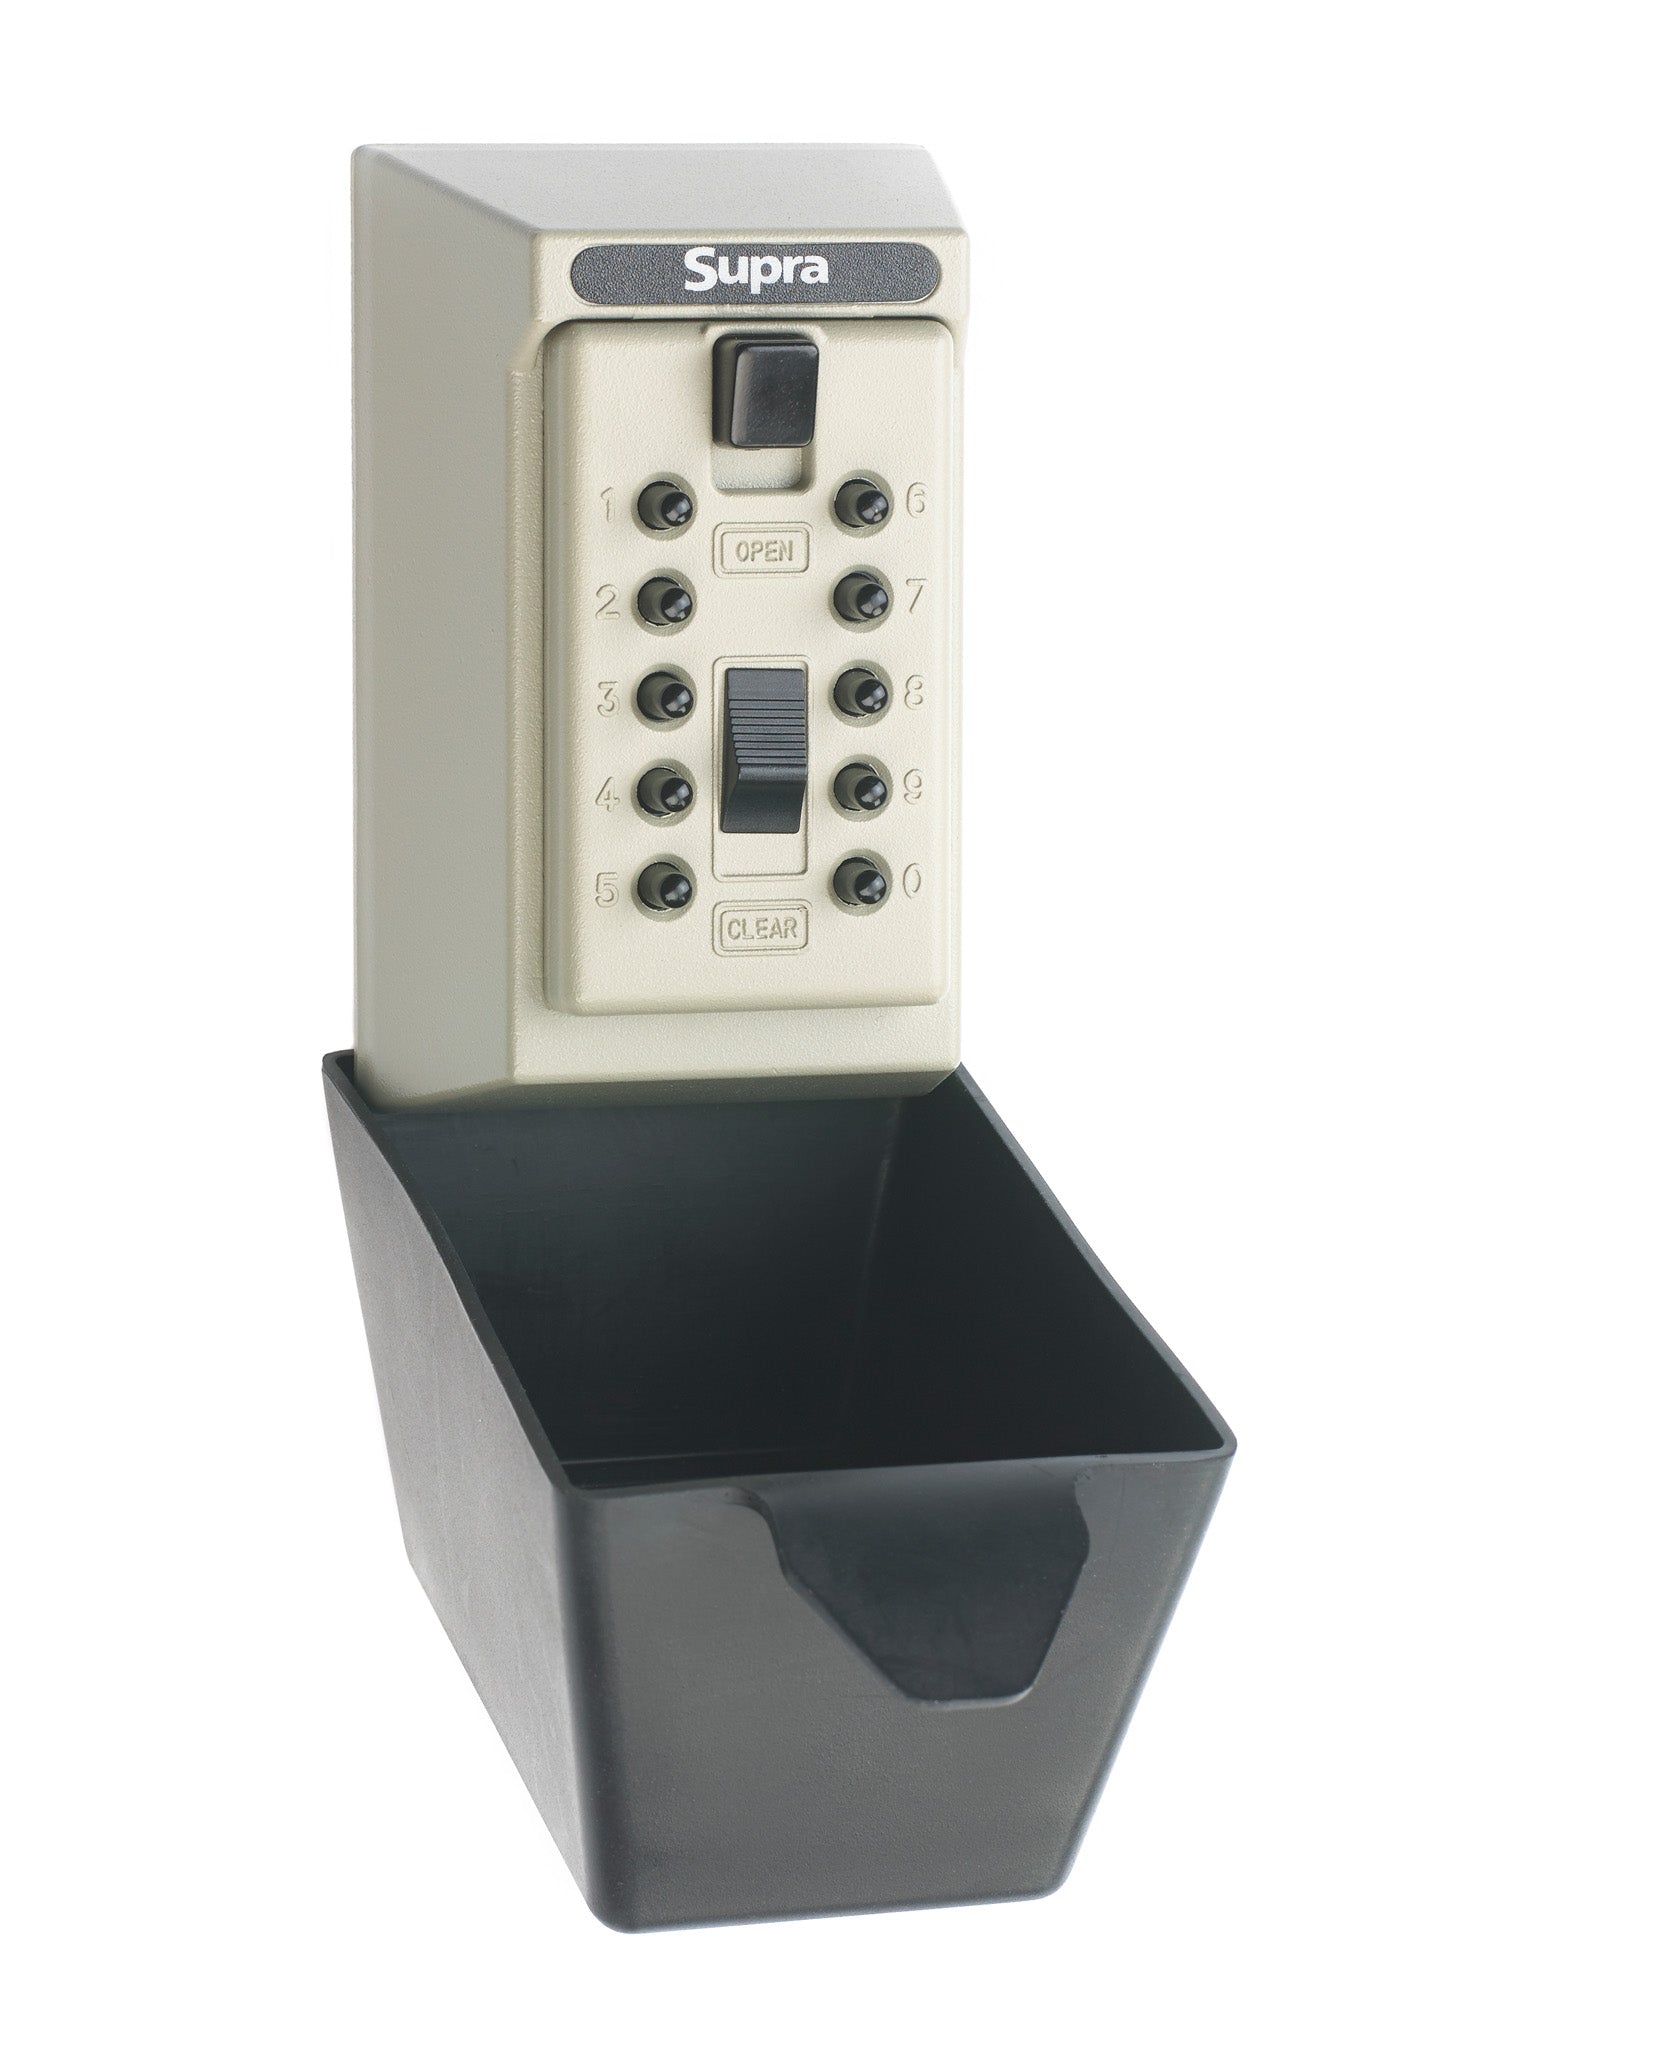 Closed Supra S5 permanent key safe with weather cover open